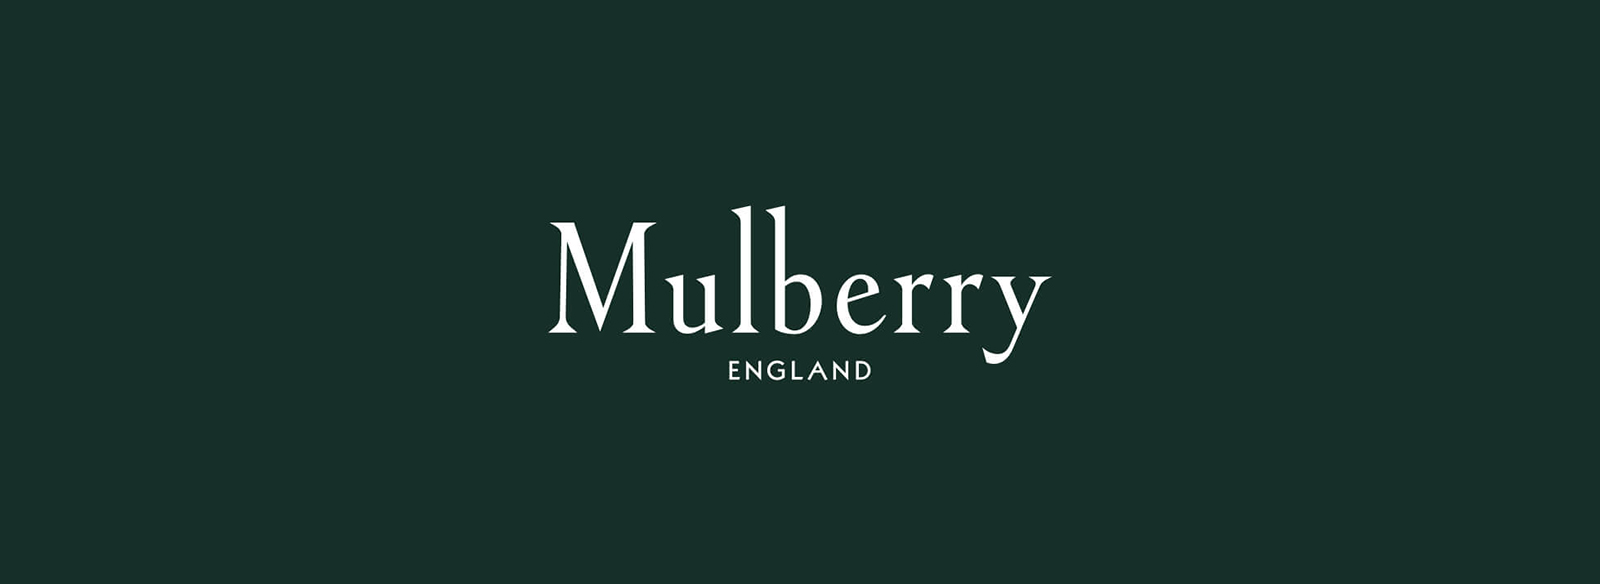 UK Brand Mulberry Launches 100% Sustainable Bag and Our Indian Favourites - Seams For Dreams